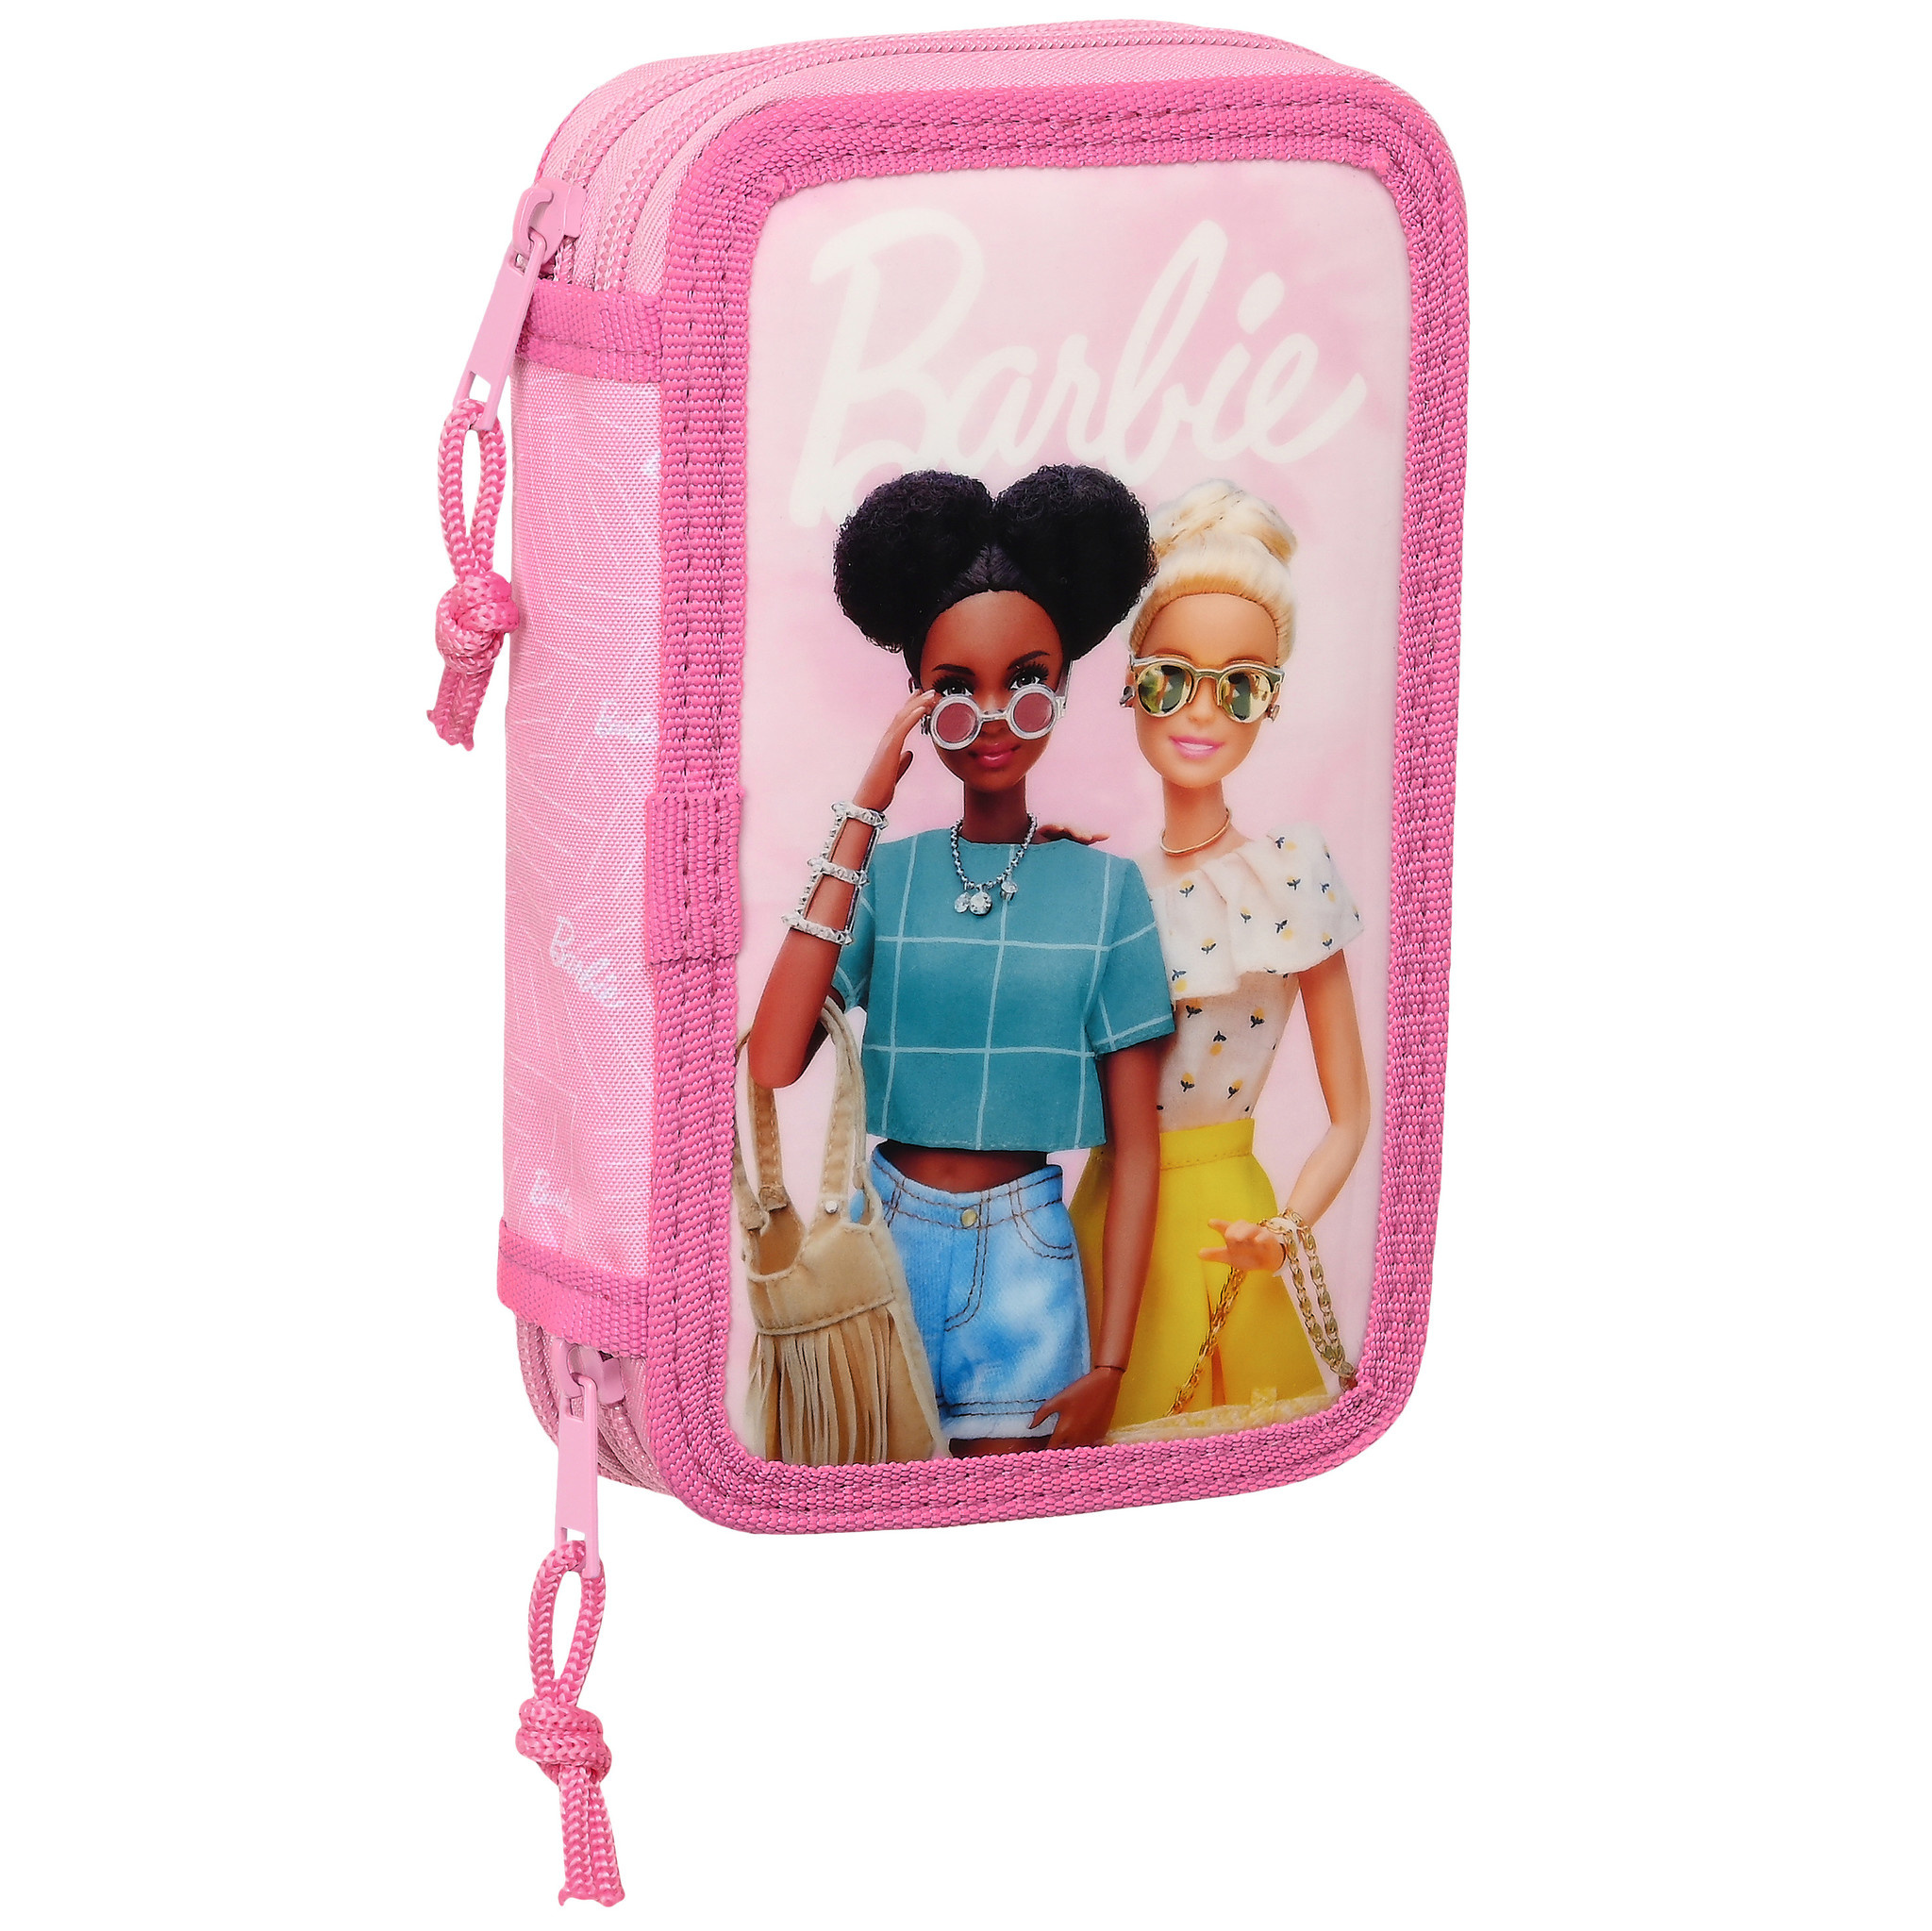 Barbie Filled pouch, Girl -28 pieces - 19.5 x 12.5 x 4 cm - Polyester